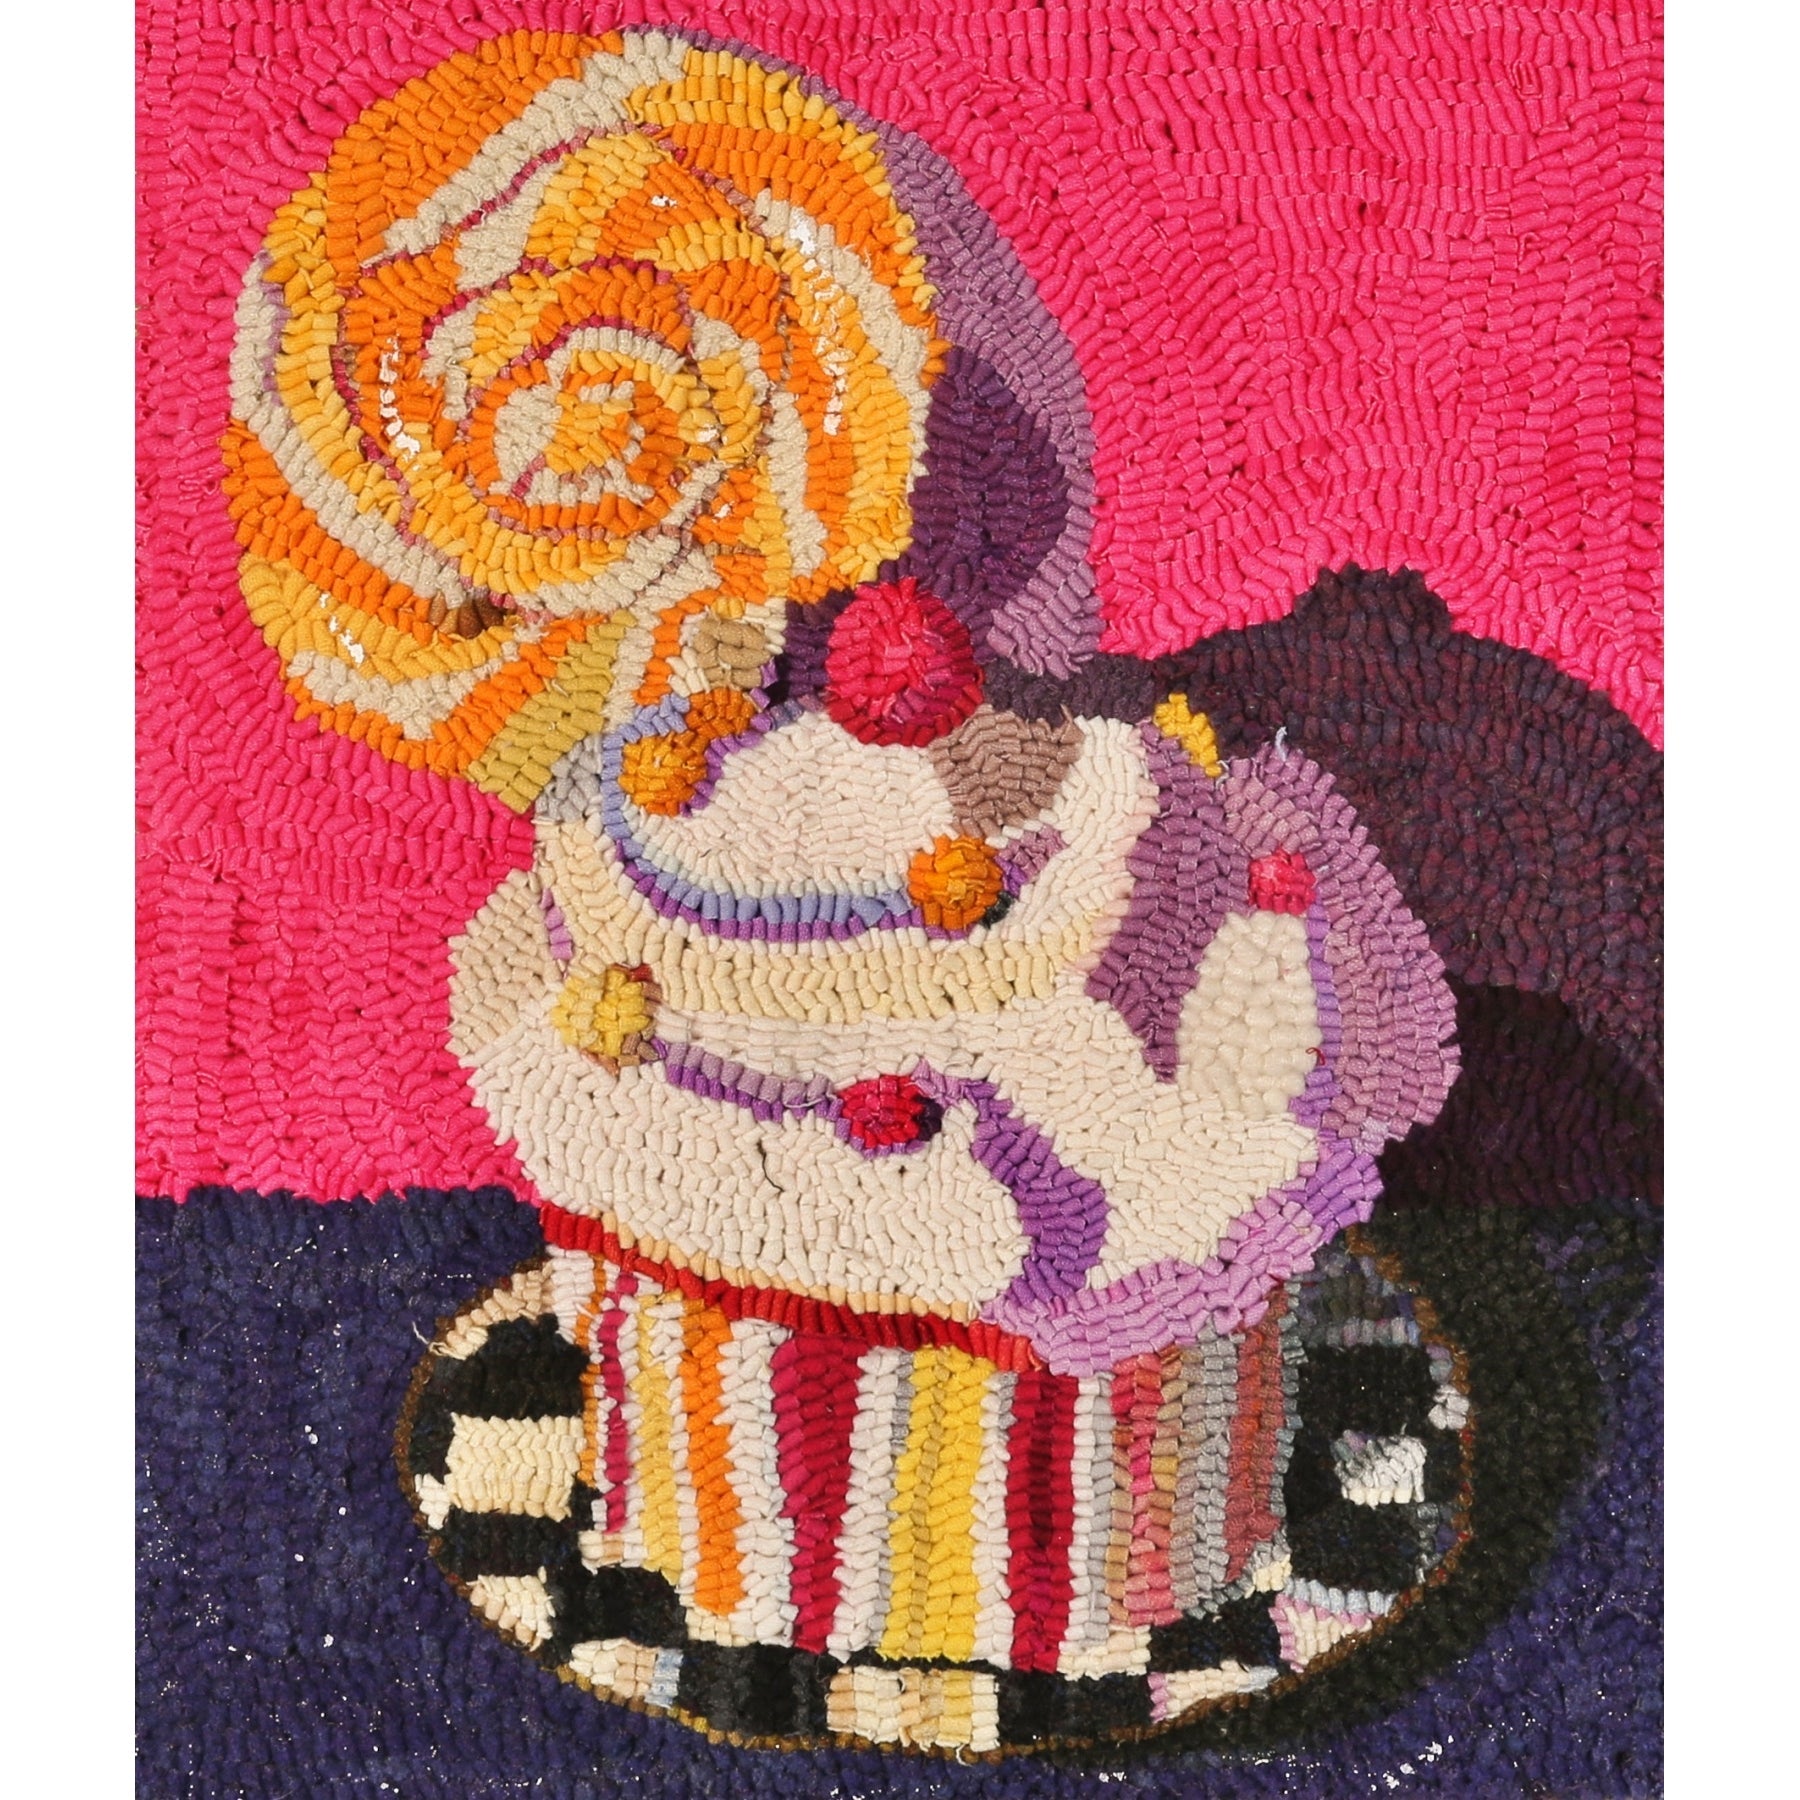 Lollipop & Cup Cake, rug hooked by Victoria Rudolph